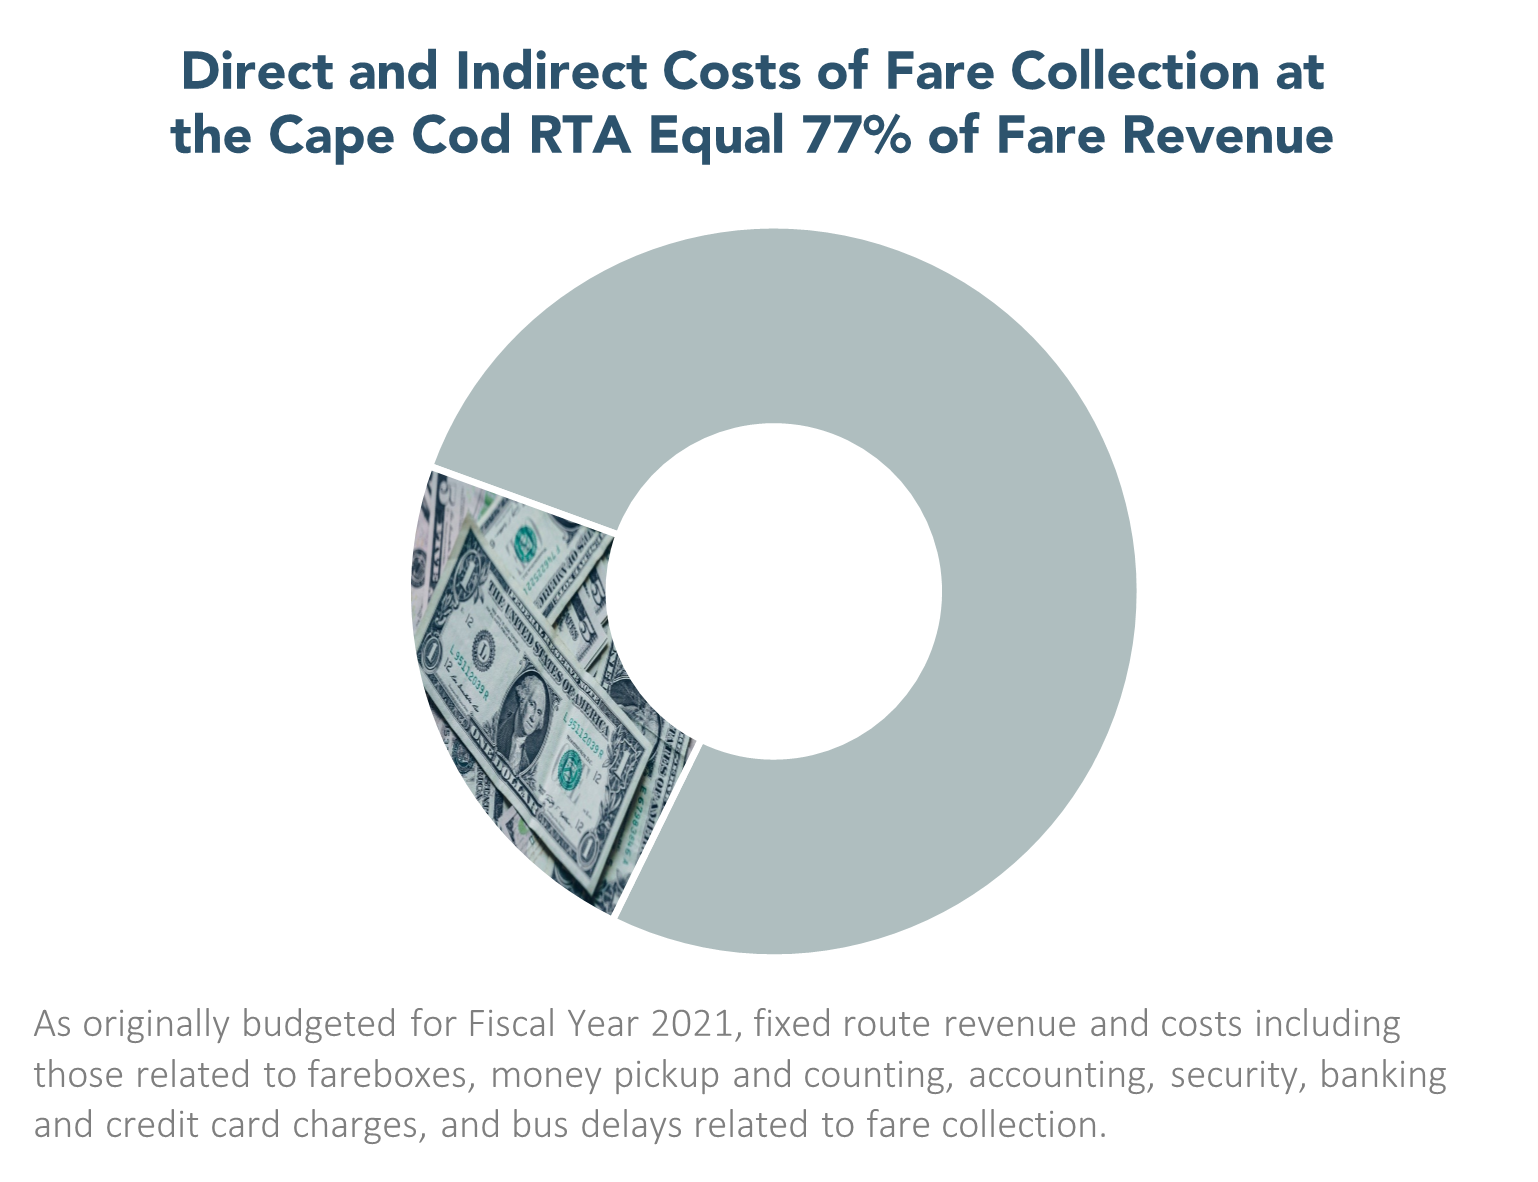 Direct and Indirect Costs of Fare Collection